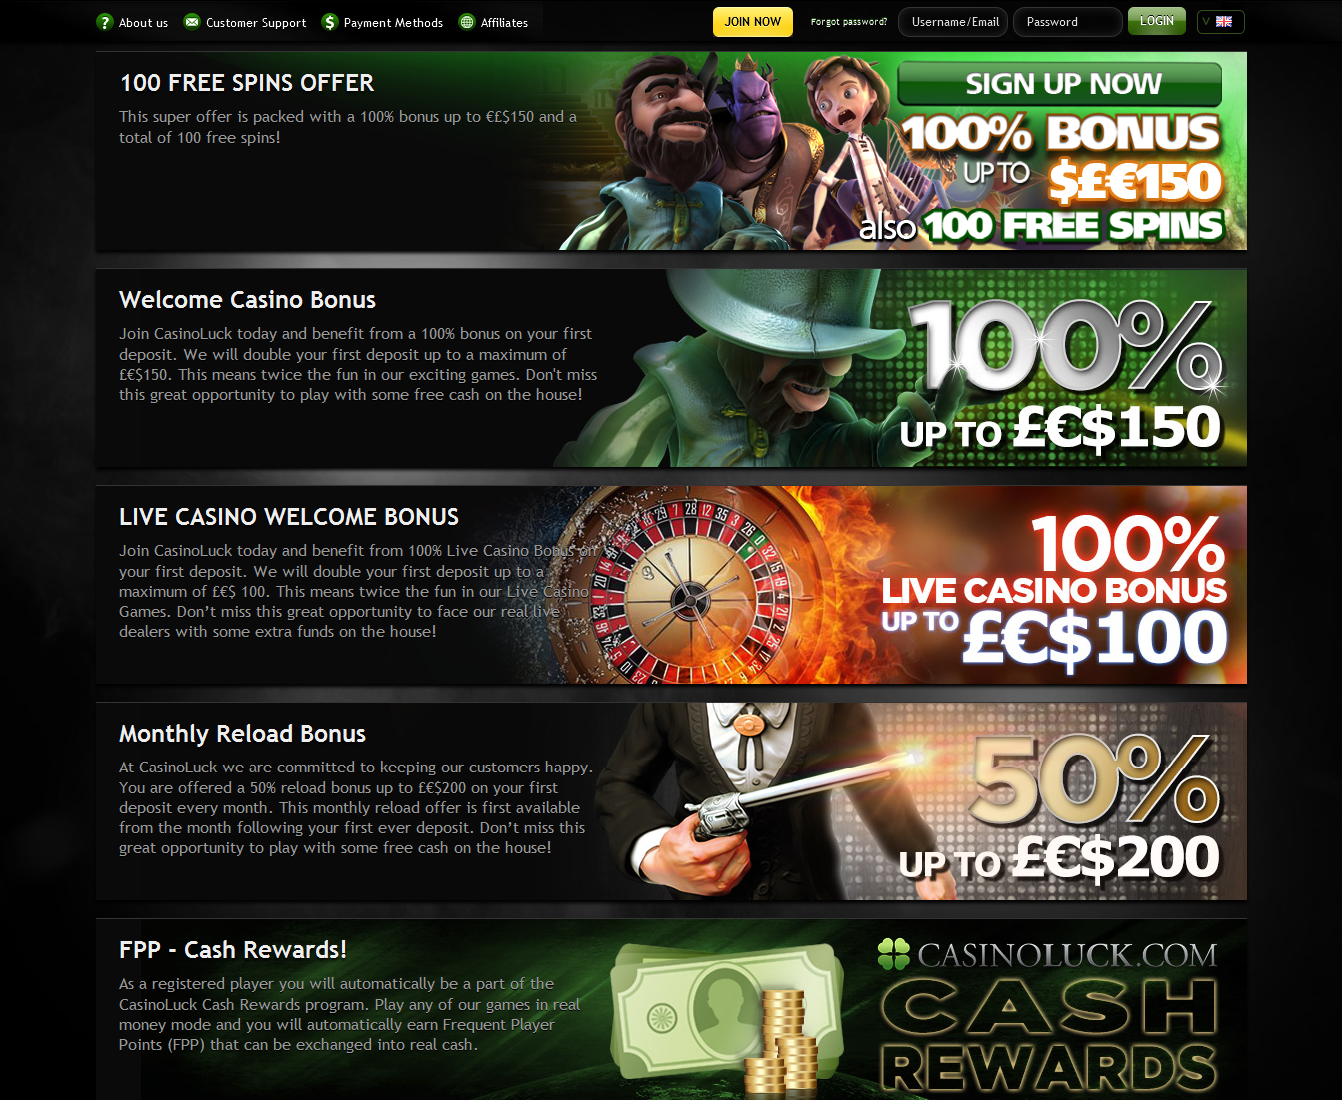 Casino Luck promotions